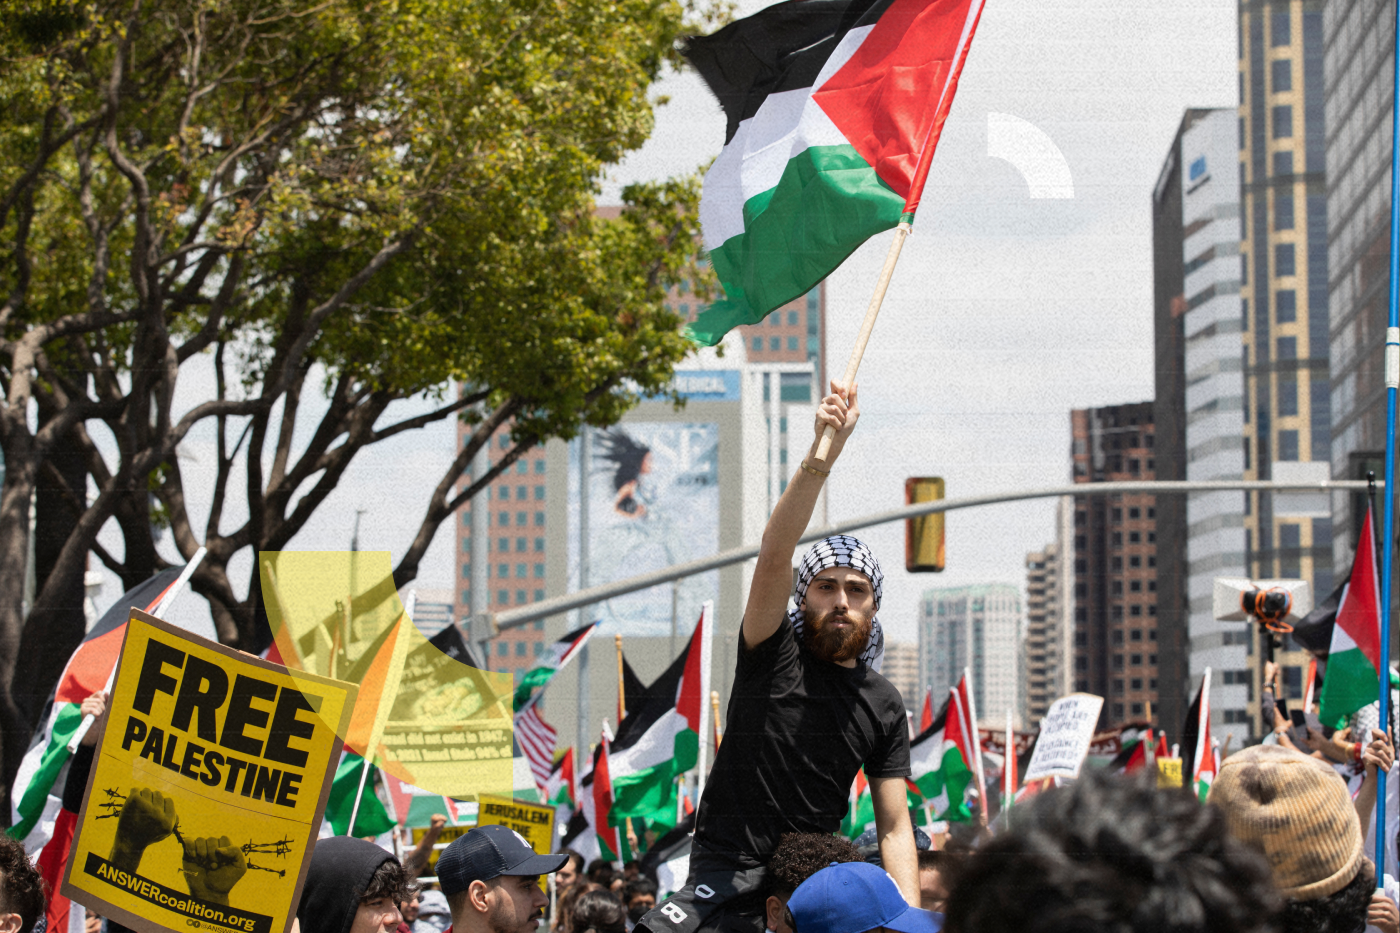 Los Angeles, California, USA - May 15, 2021: Individuals protest the hostile actions of Israel in a Free Palestine event.